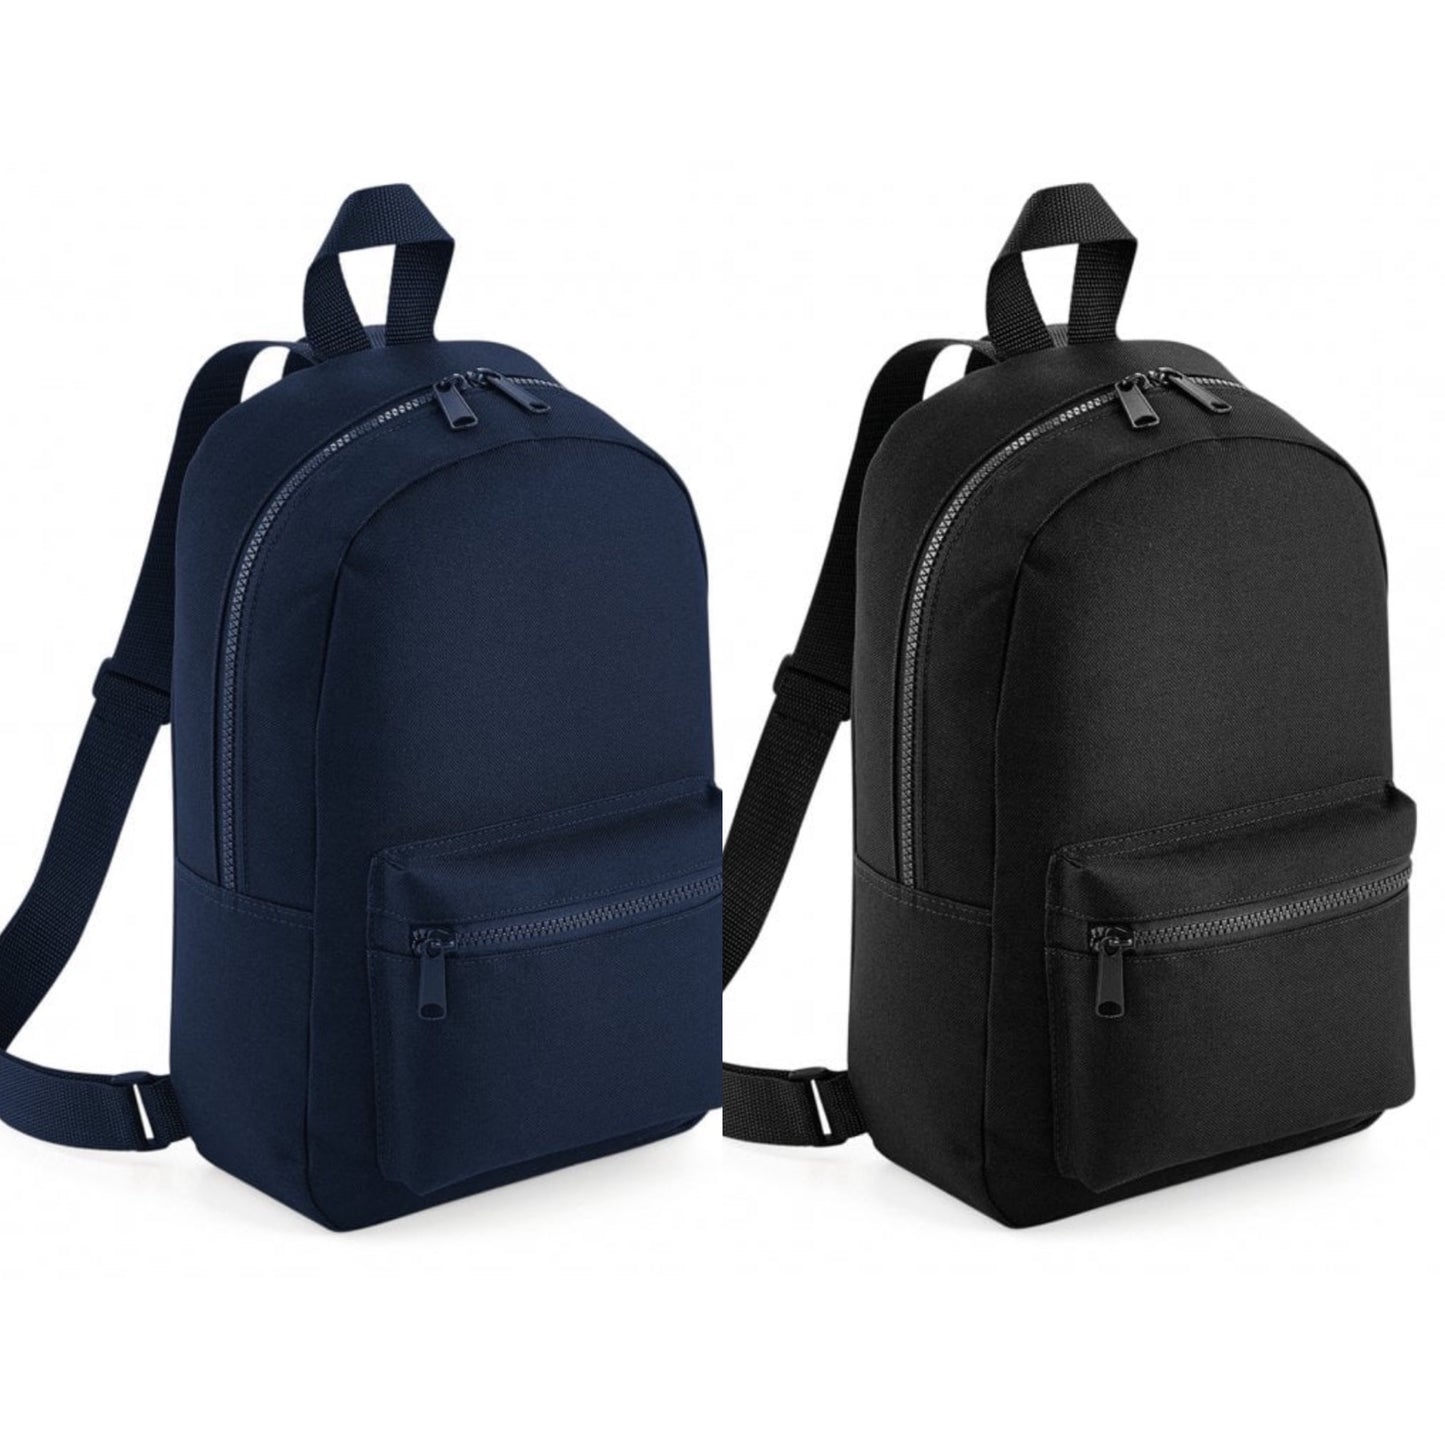 Create Your Own Personalised Backpack